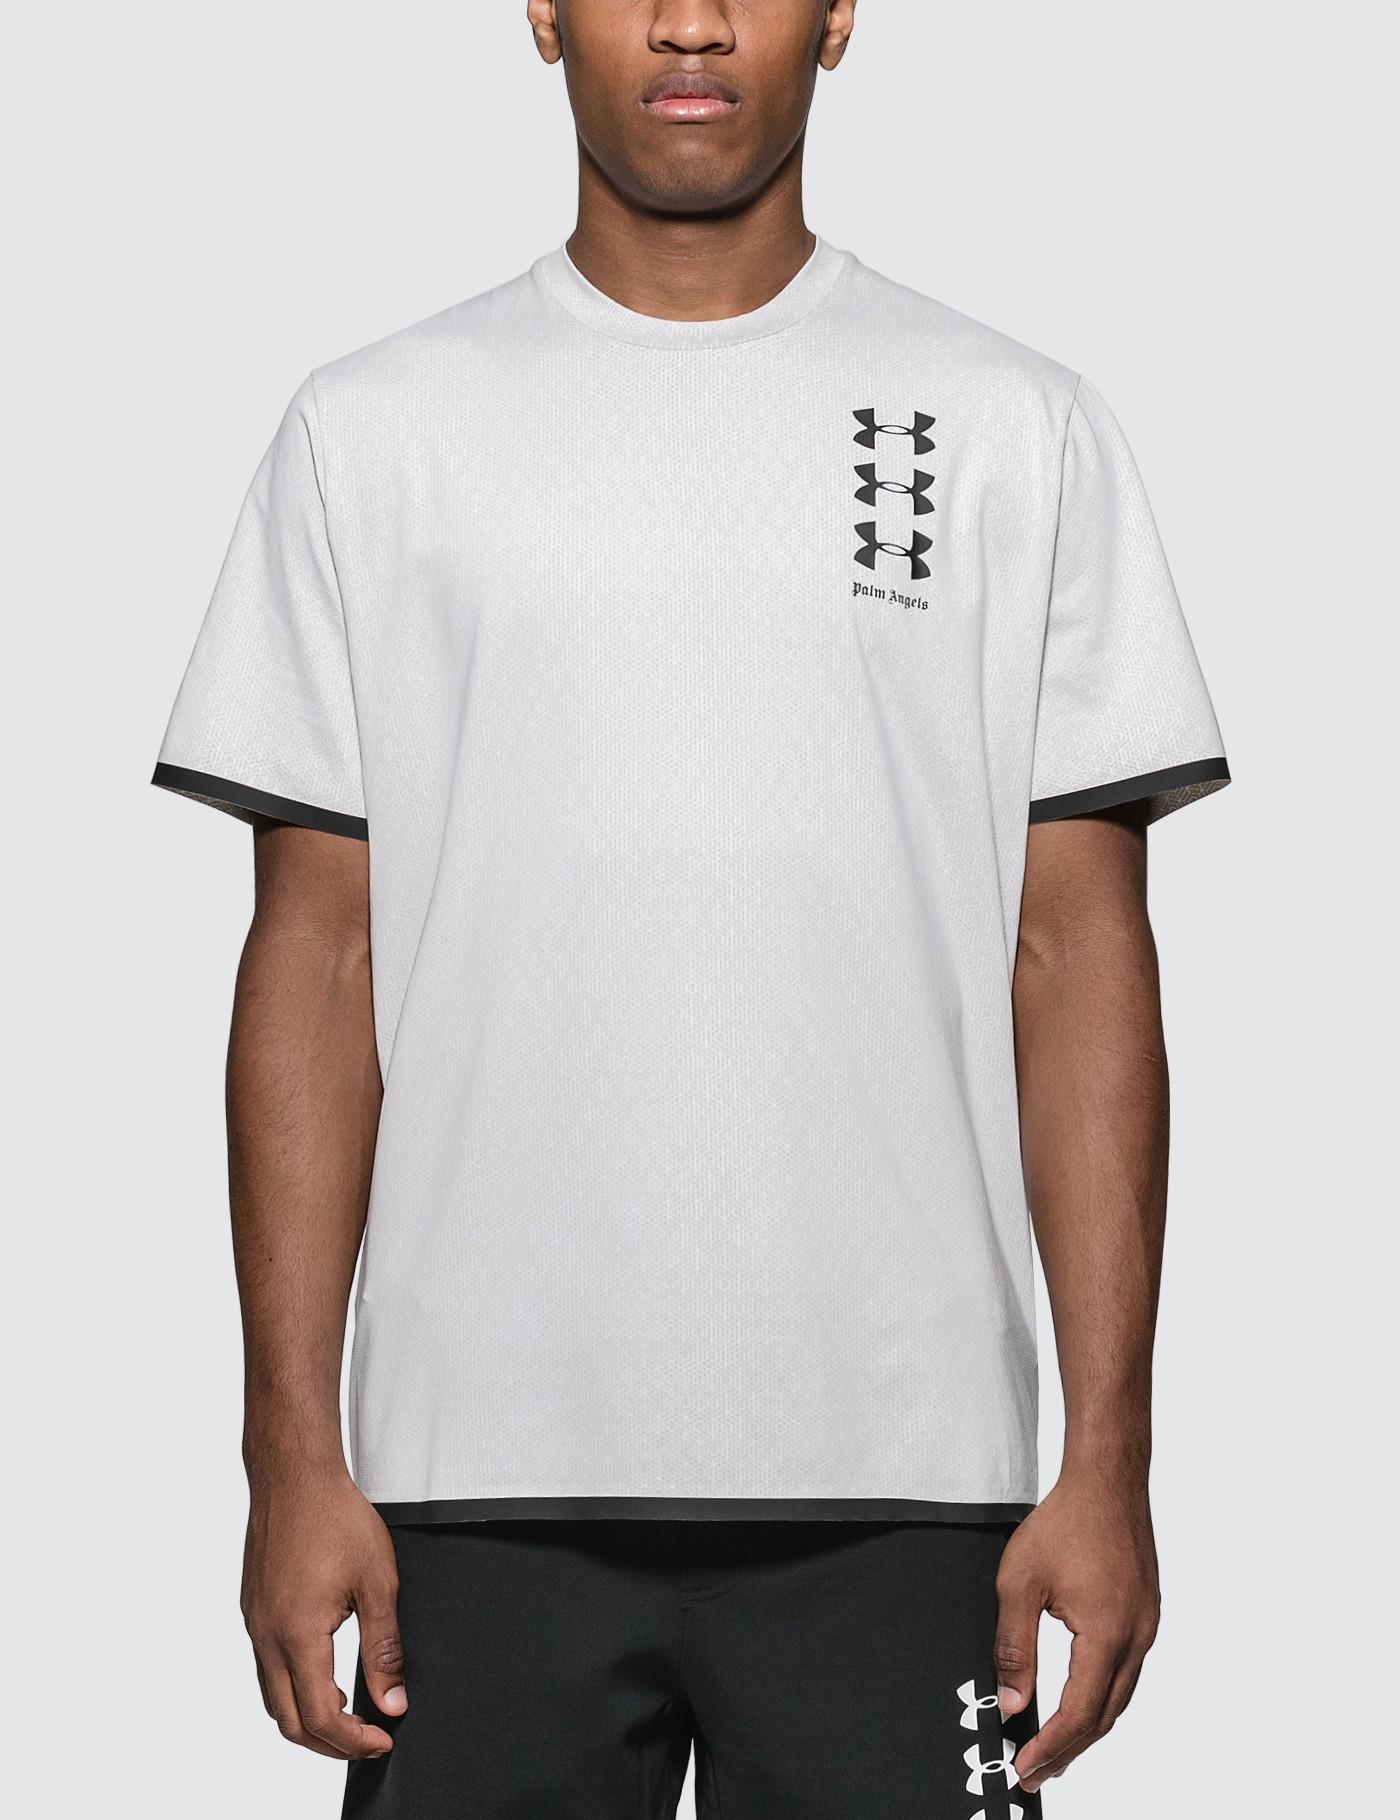 Palm Angels Synthetic Under Armour X Basic T-shirt in Black for Men - Lyst